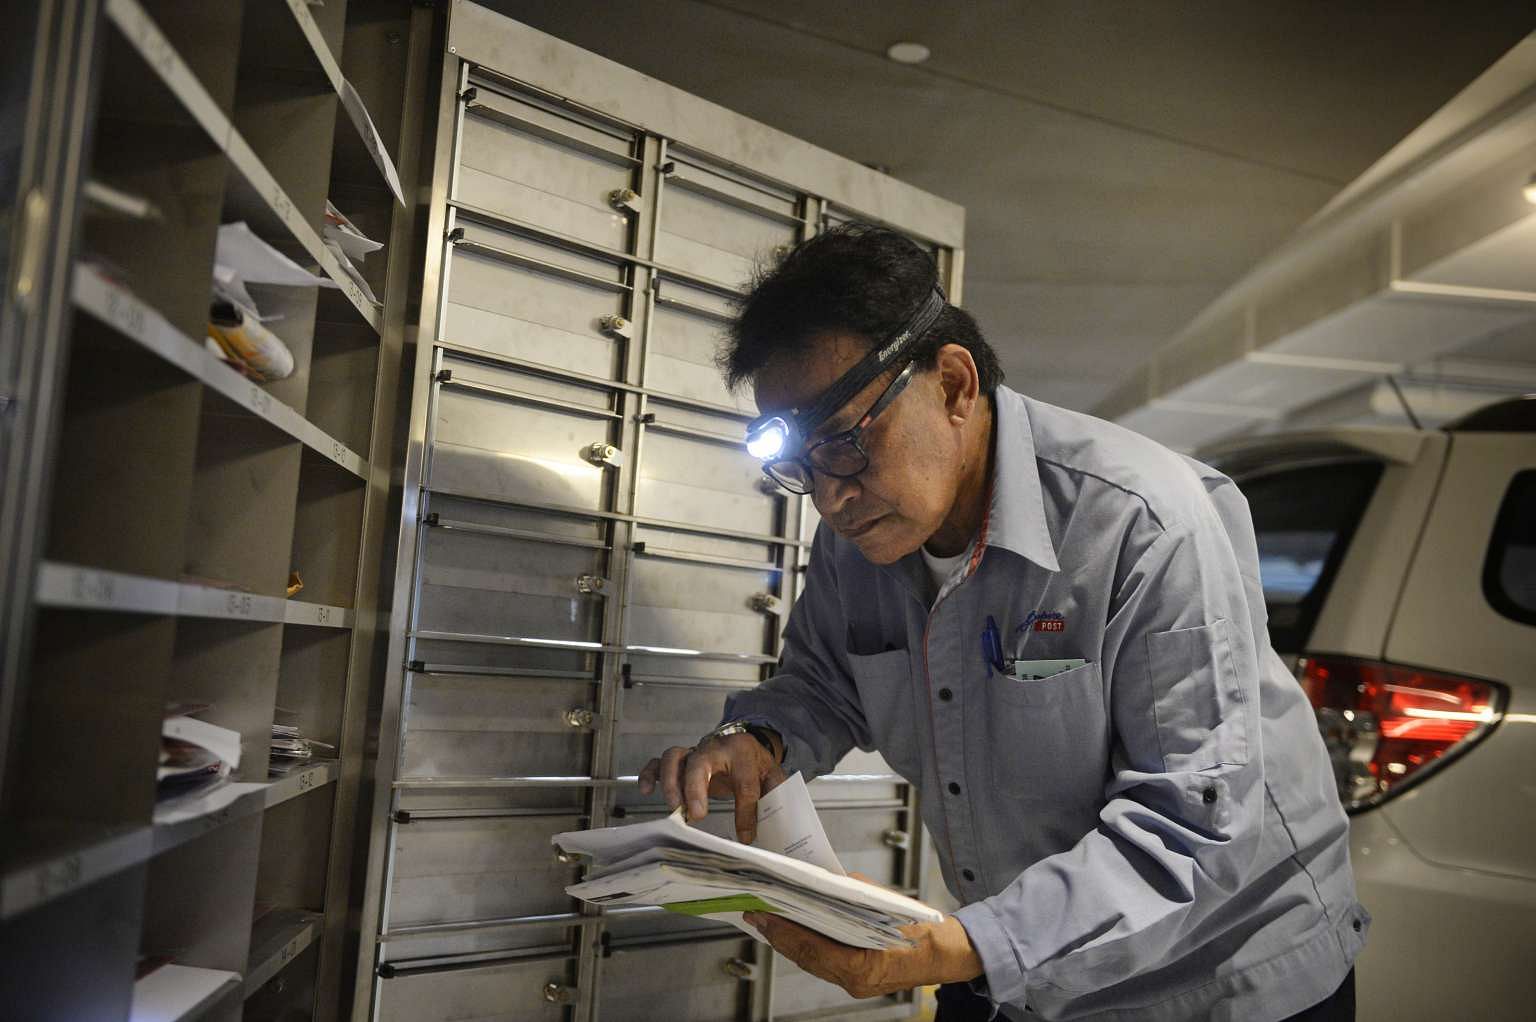 Postman Salim Nahrawi, 69, delivering letters at a building in Tanjong Pagar. The head light helps improve visibility.